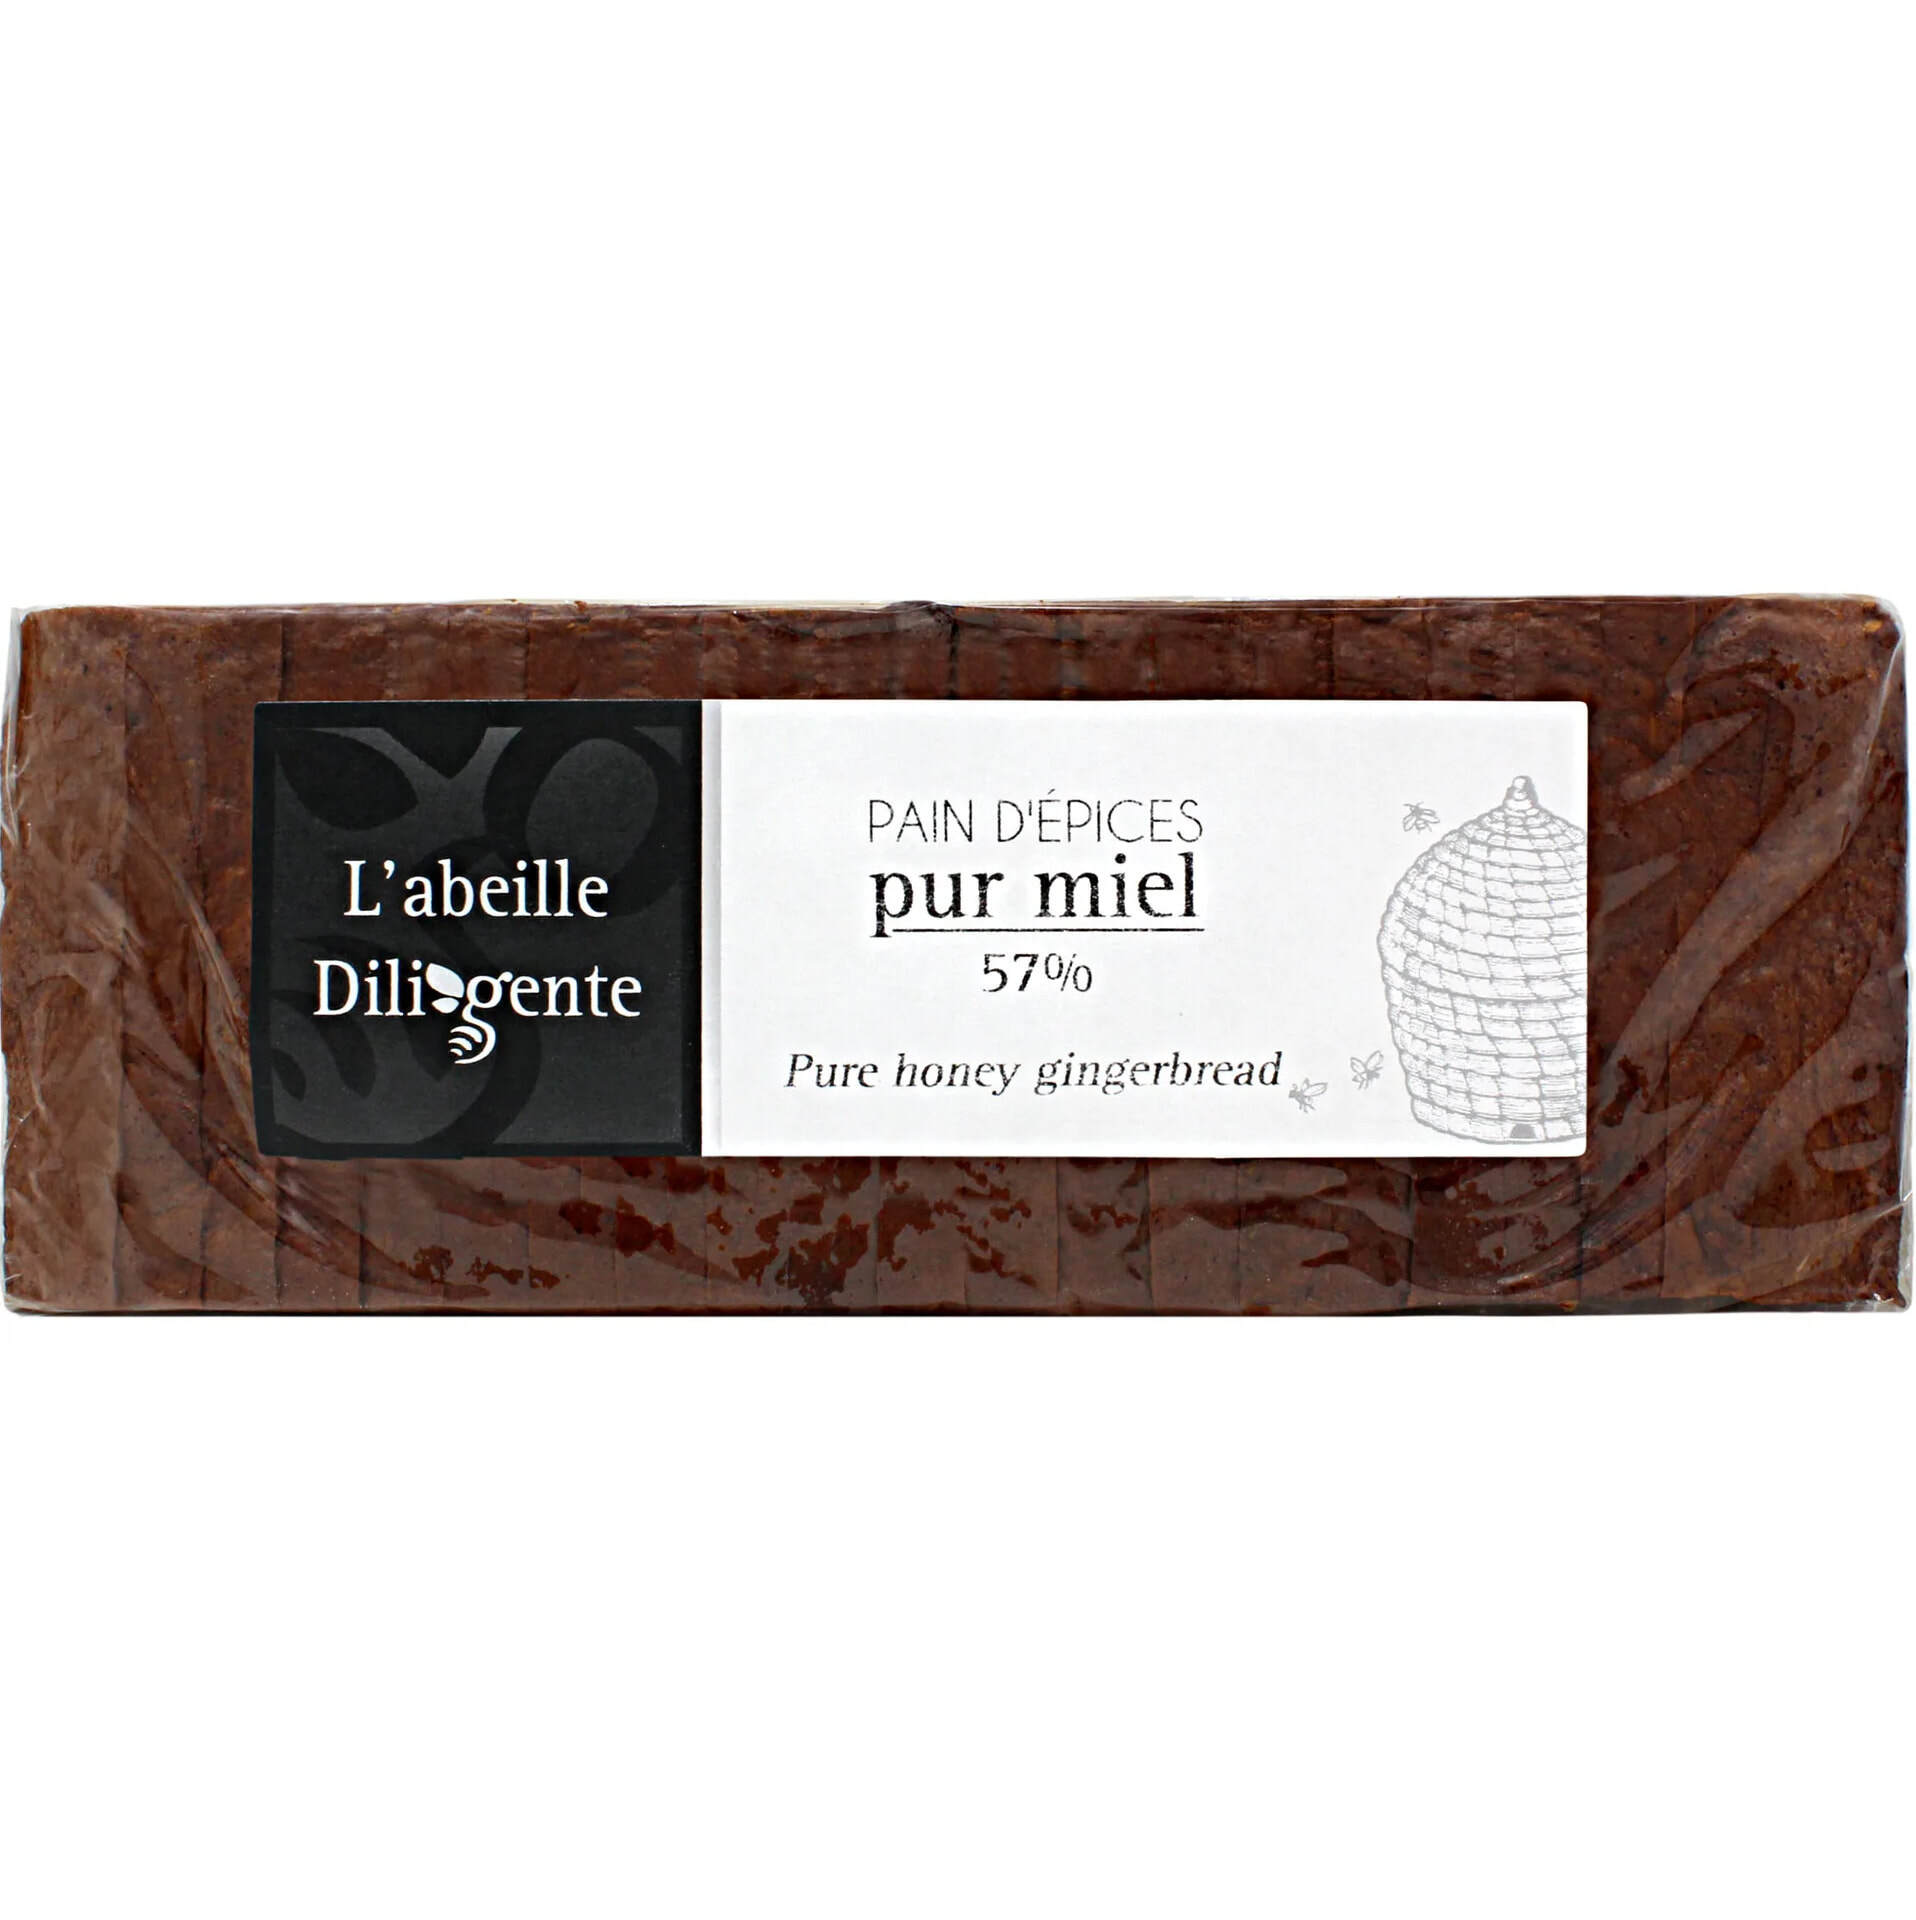 🇫🇷 Cracotte Breakfast Toasts by LU, 8.8 oz (250g)